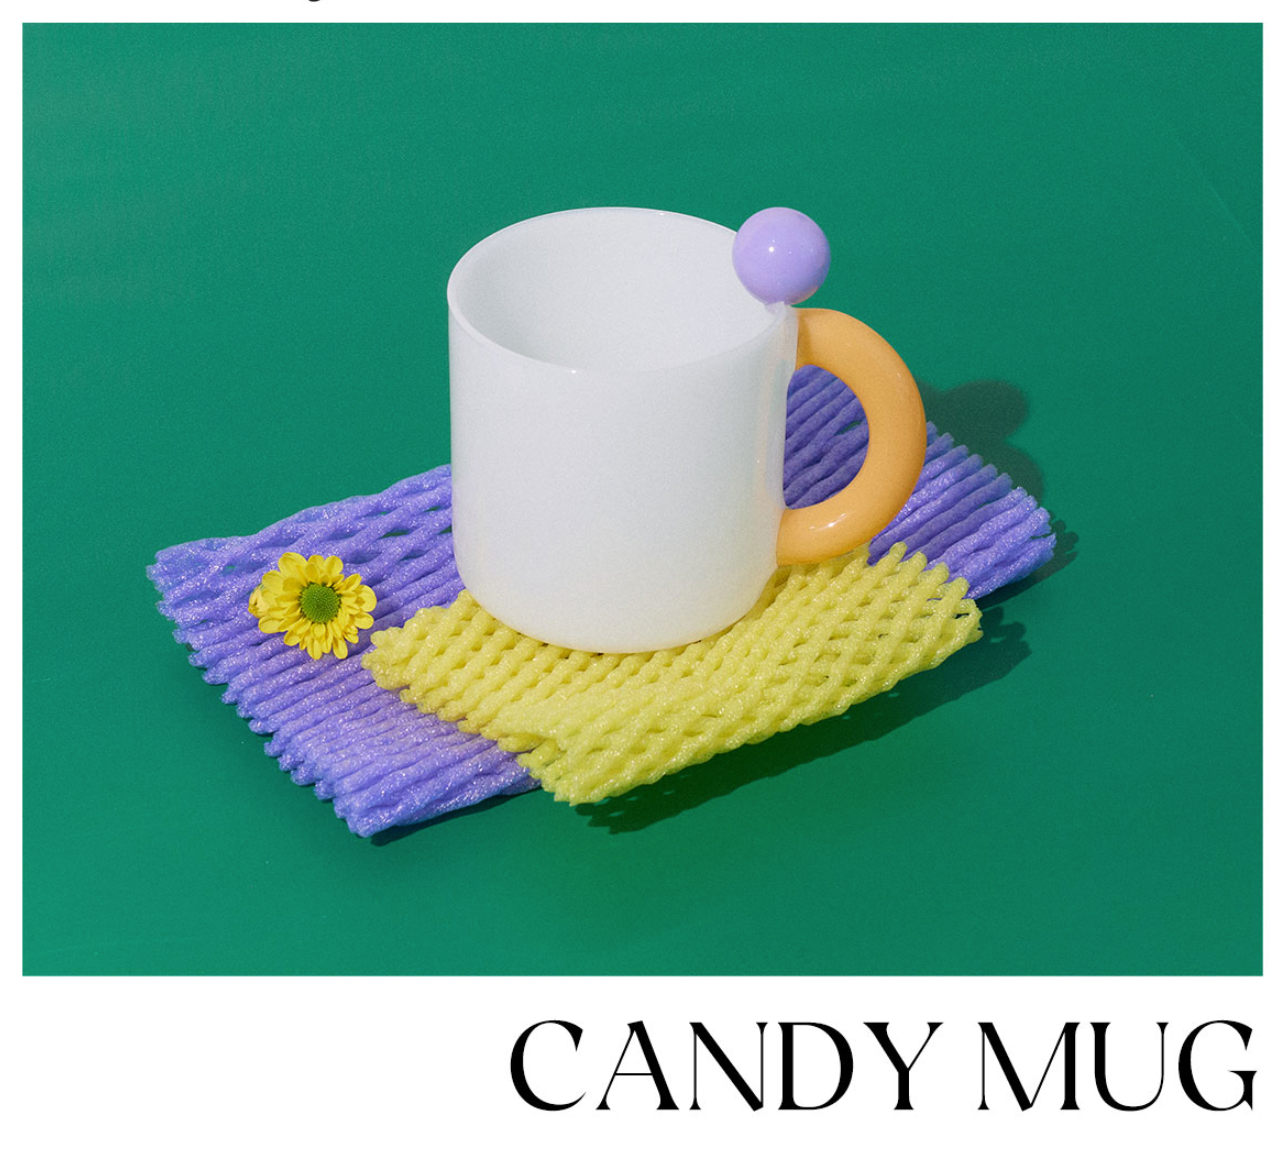 Stainless glass colorful cute candy handcrafted glass mug, by A Bit Sleepy homeware drinkware concept store